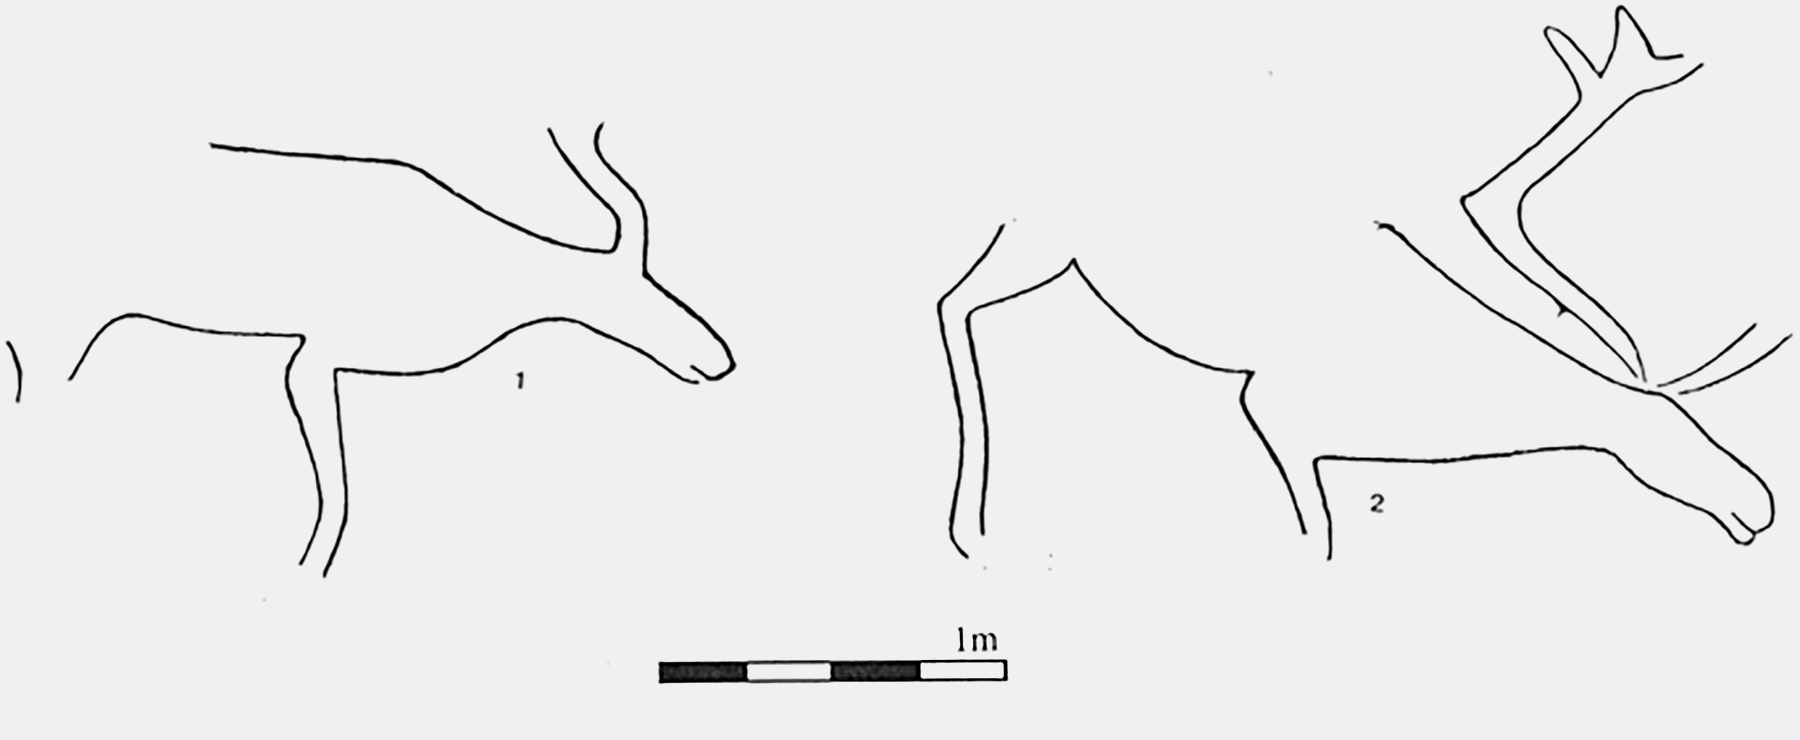 A tracing showing the simple lines of an engraved reindeer from Sagelva in Nordlamd